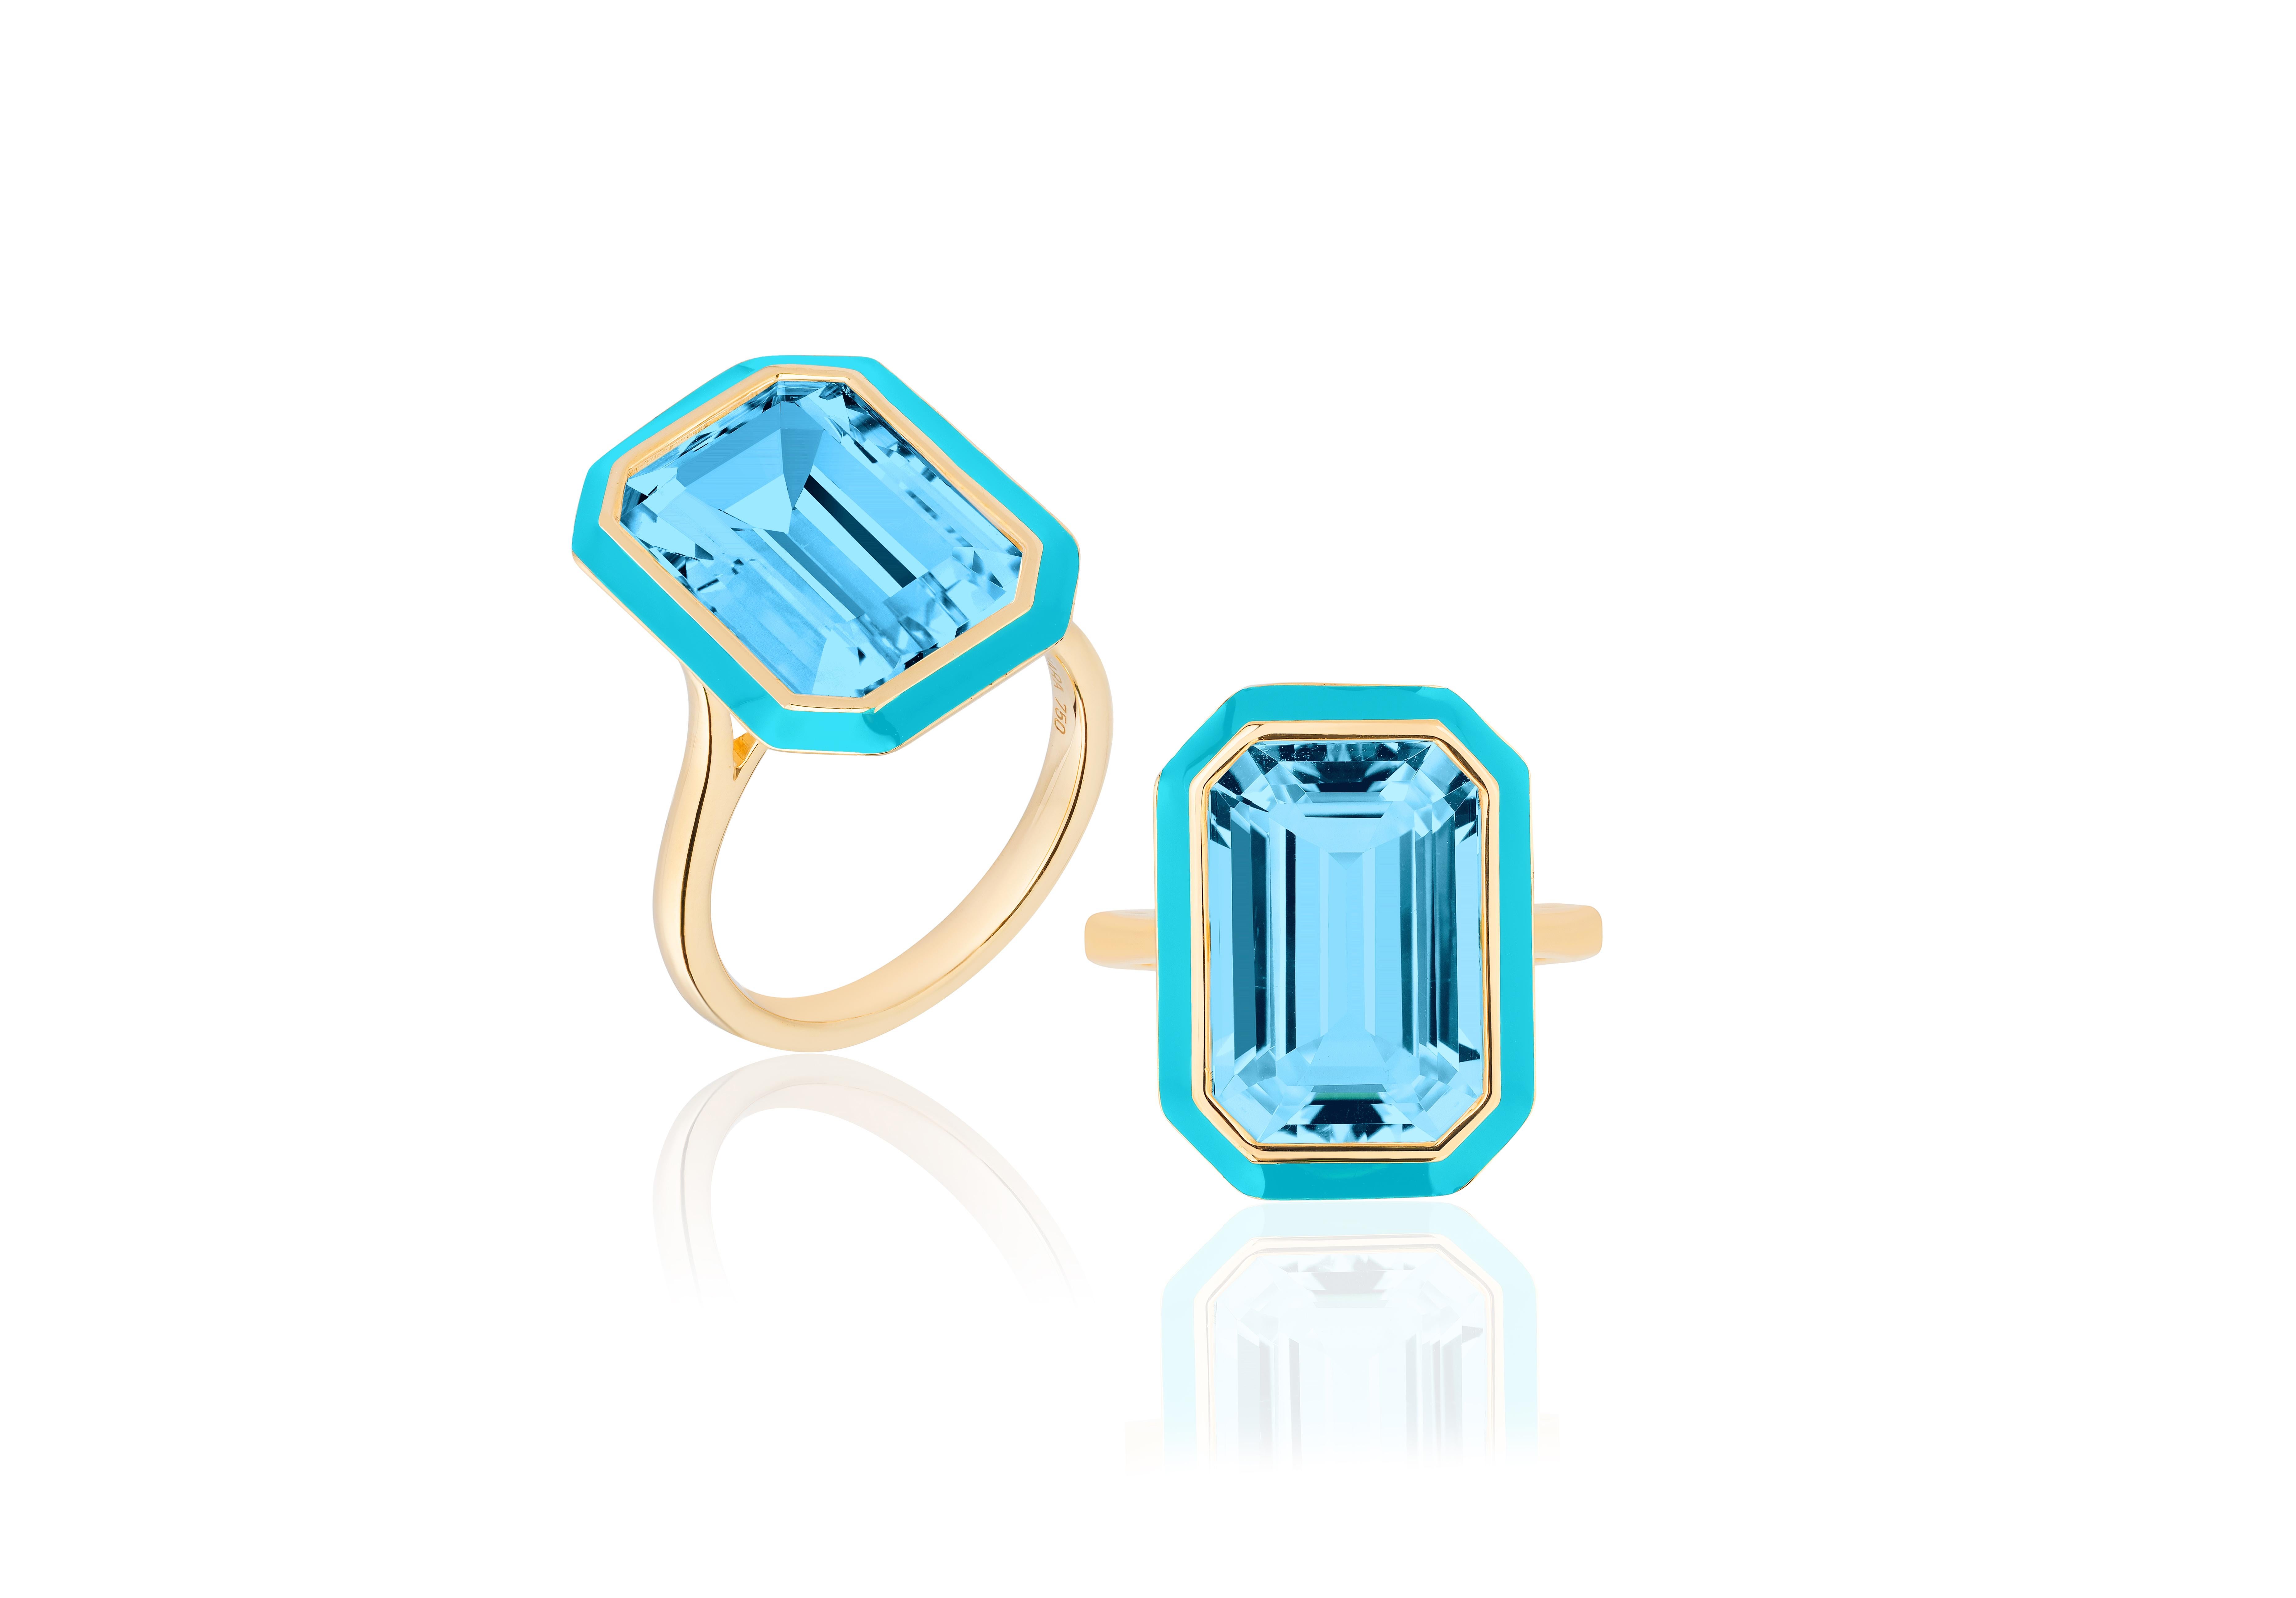 This is a unique combination of Blue Topaz and Turquoise enamel. If you want to make a statement this is the perfect ring to do it!

A 10 x 15 mm Blue Topaz Emerald cut ring in a bezel setting, with Turquoise enamel in the borders.

Gemstone: 100%